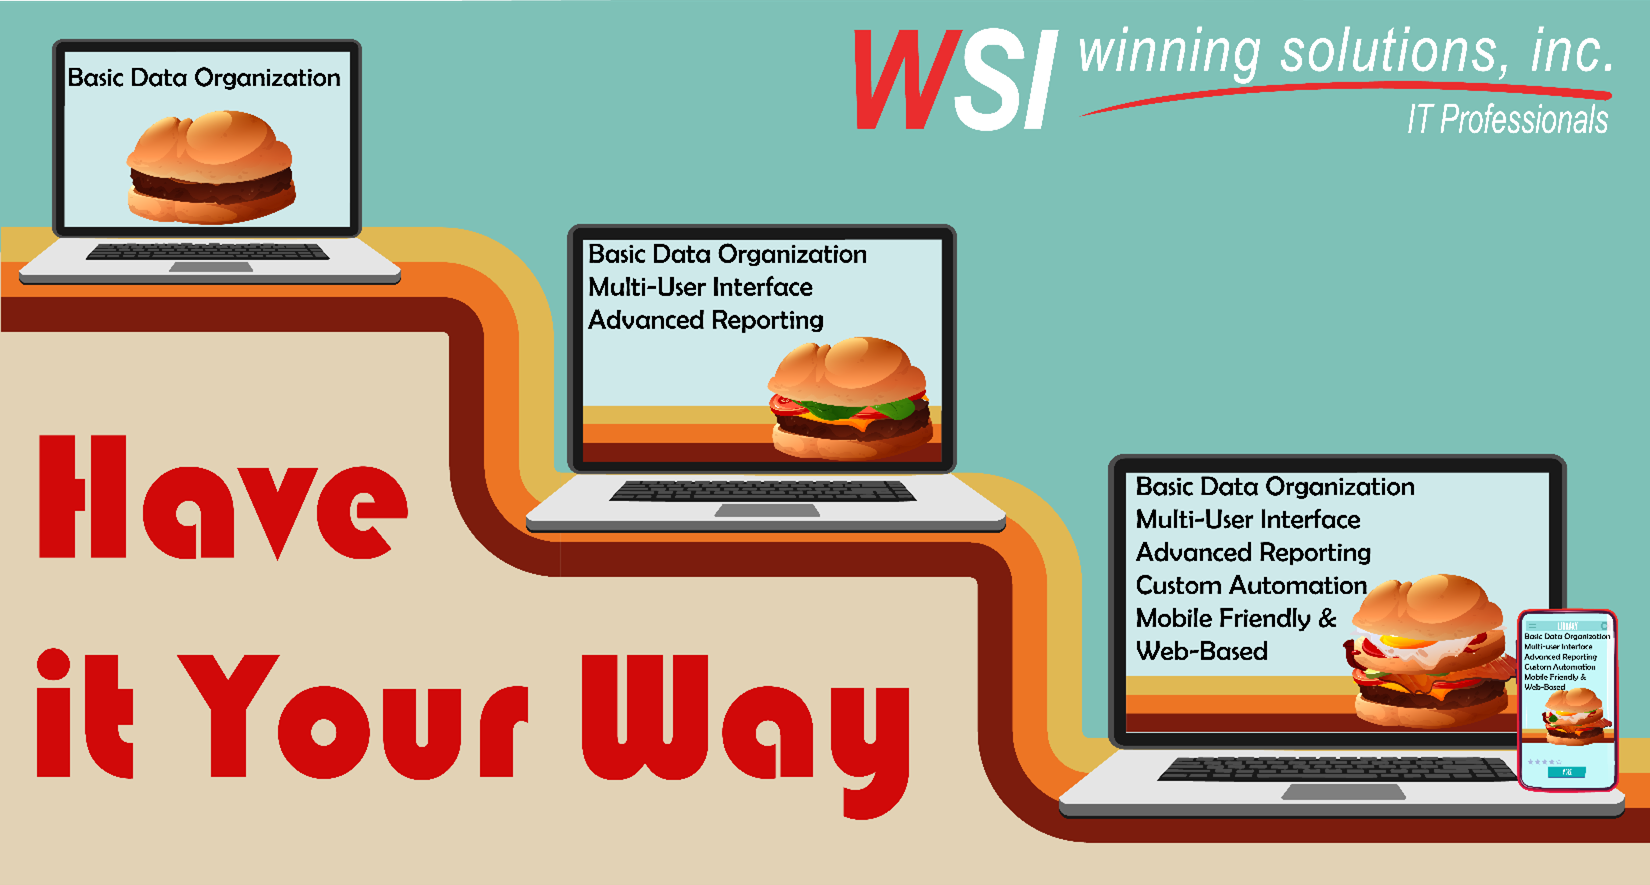 Image shows three different style of hamburgers on three laptops. first style says: Baisc Data Organization, second laptop says: basic data organization multi-user interface advanced reporting, third laptop says baisc data organization, multi-user interface advanced reporting custom automationm mobile friendly and web-based.